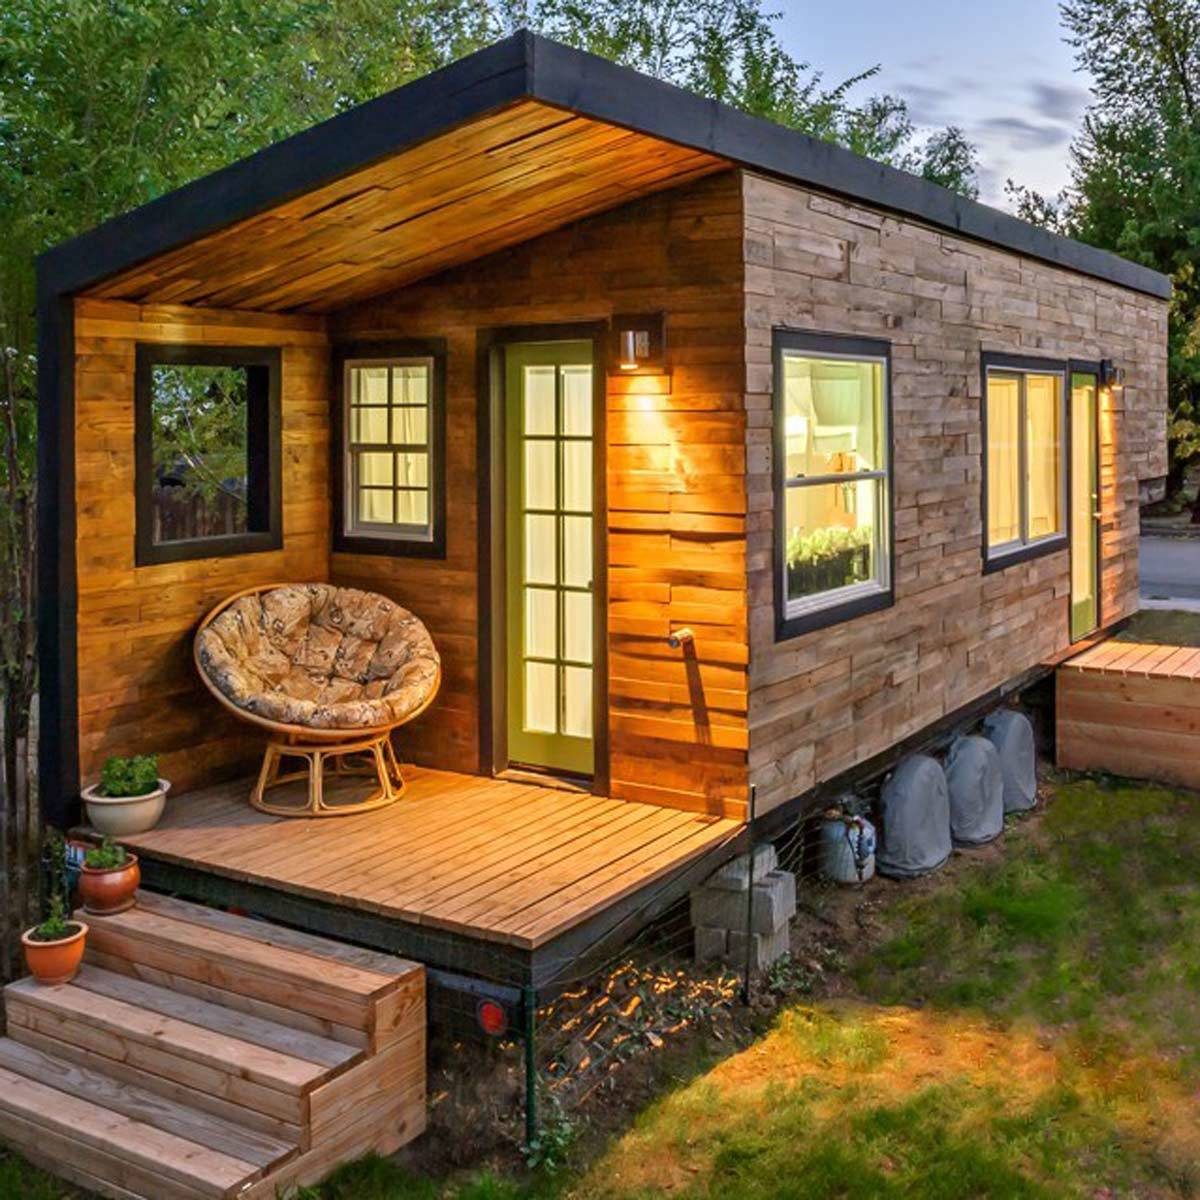 12 Things to Consider Before Building a Tiny Home